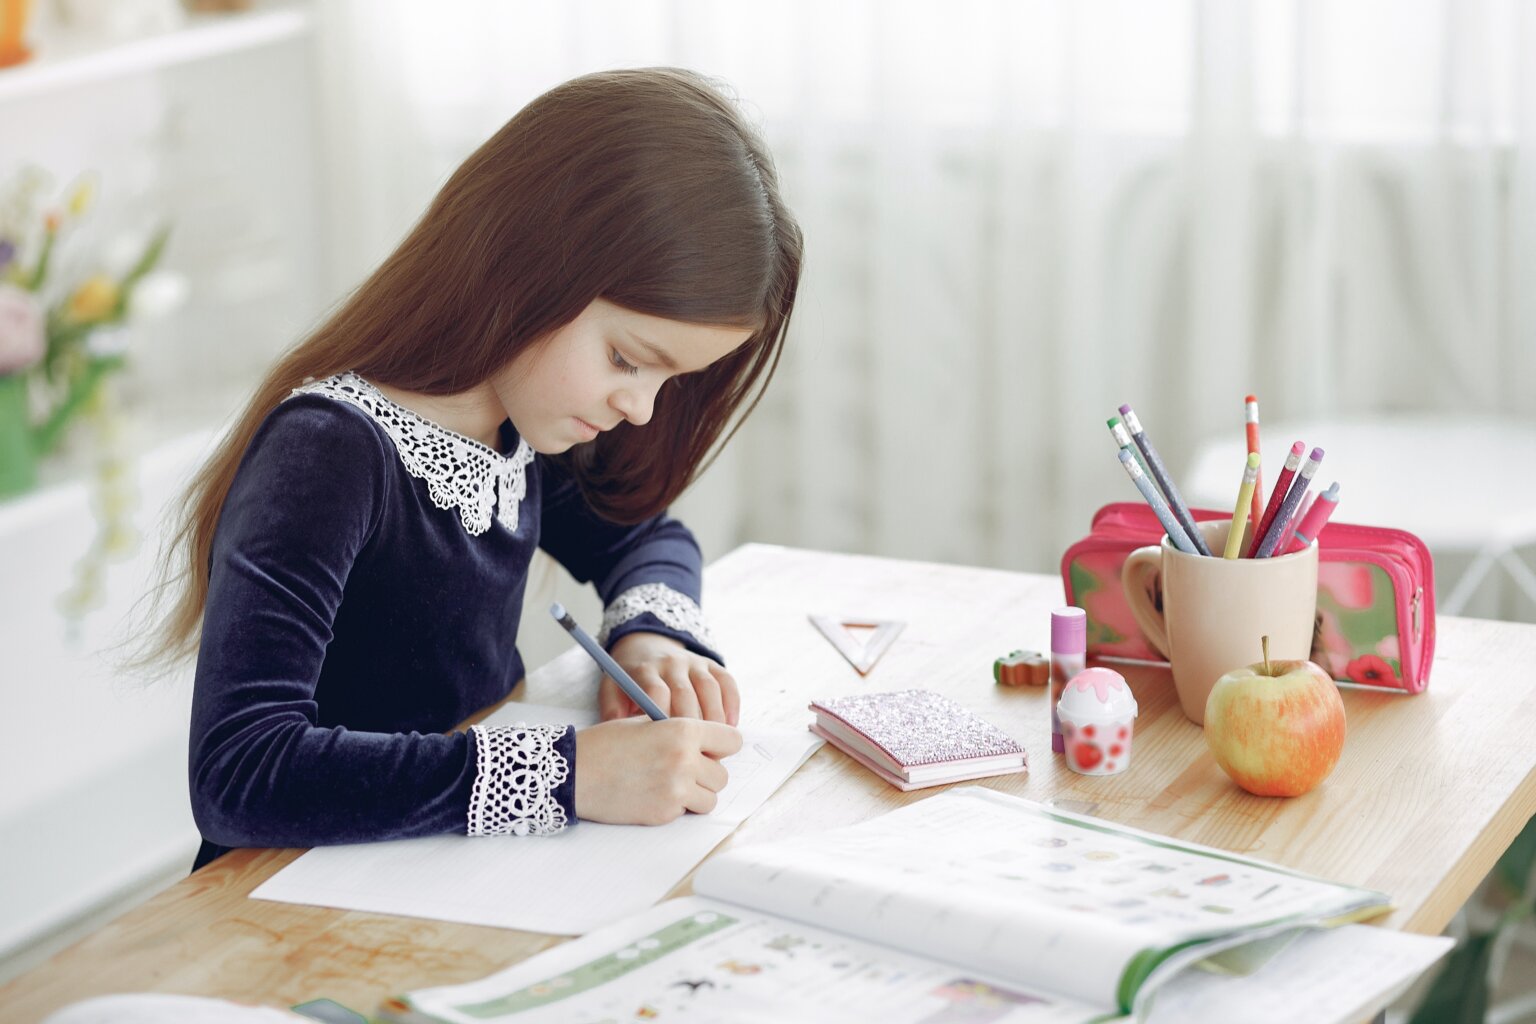 A girl working on homework at her desk in her home study space.